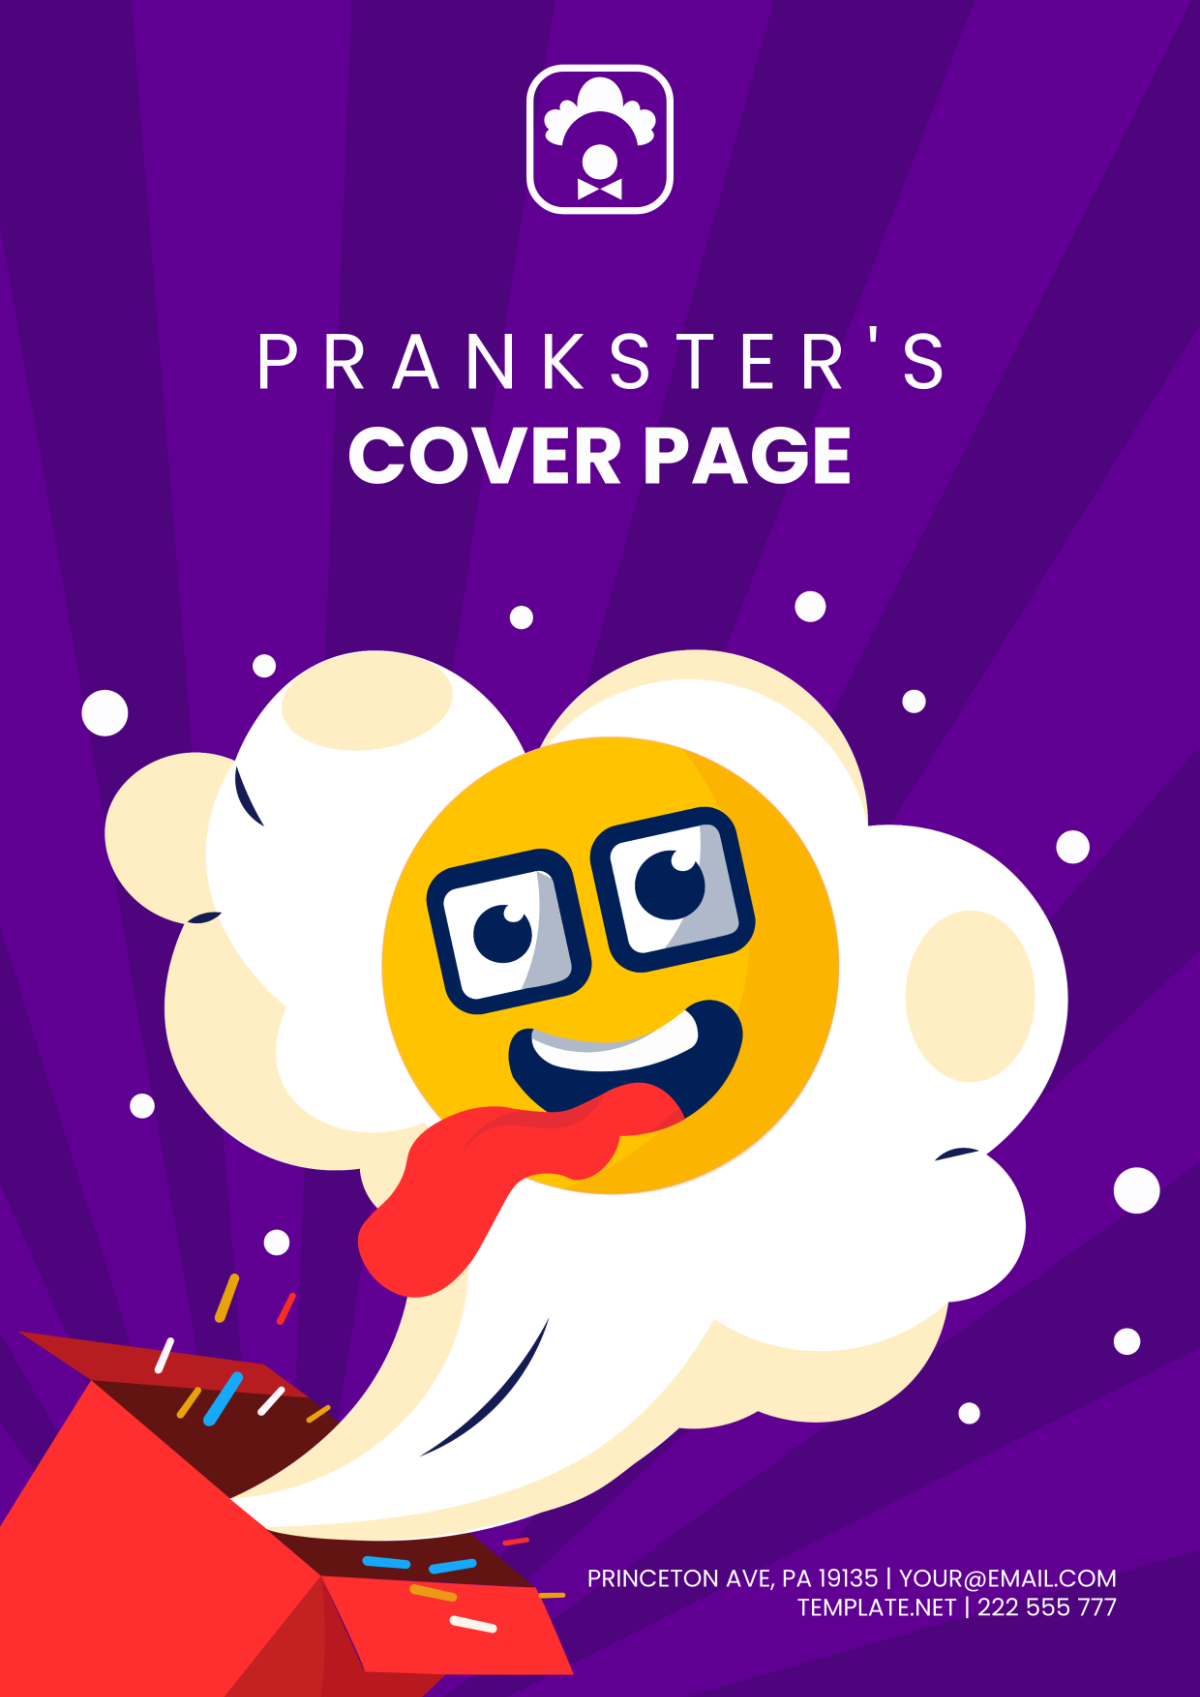 Prankster's Cover Page